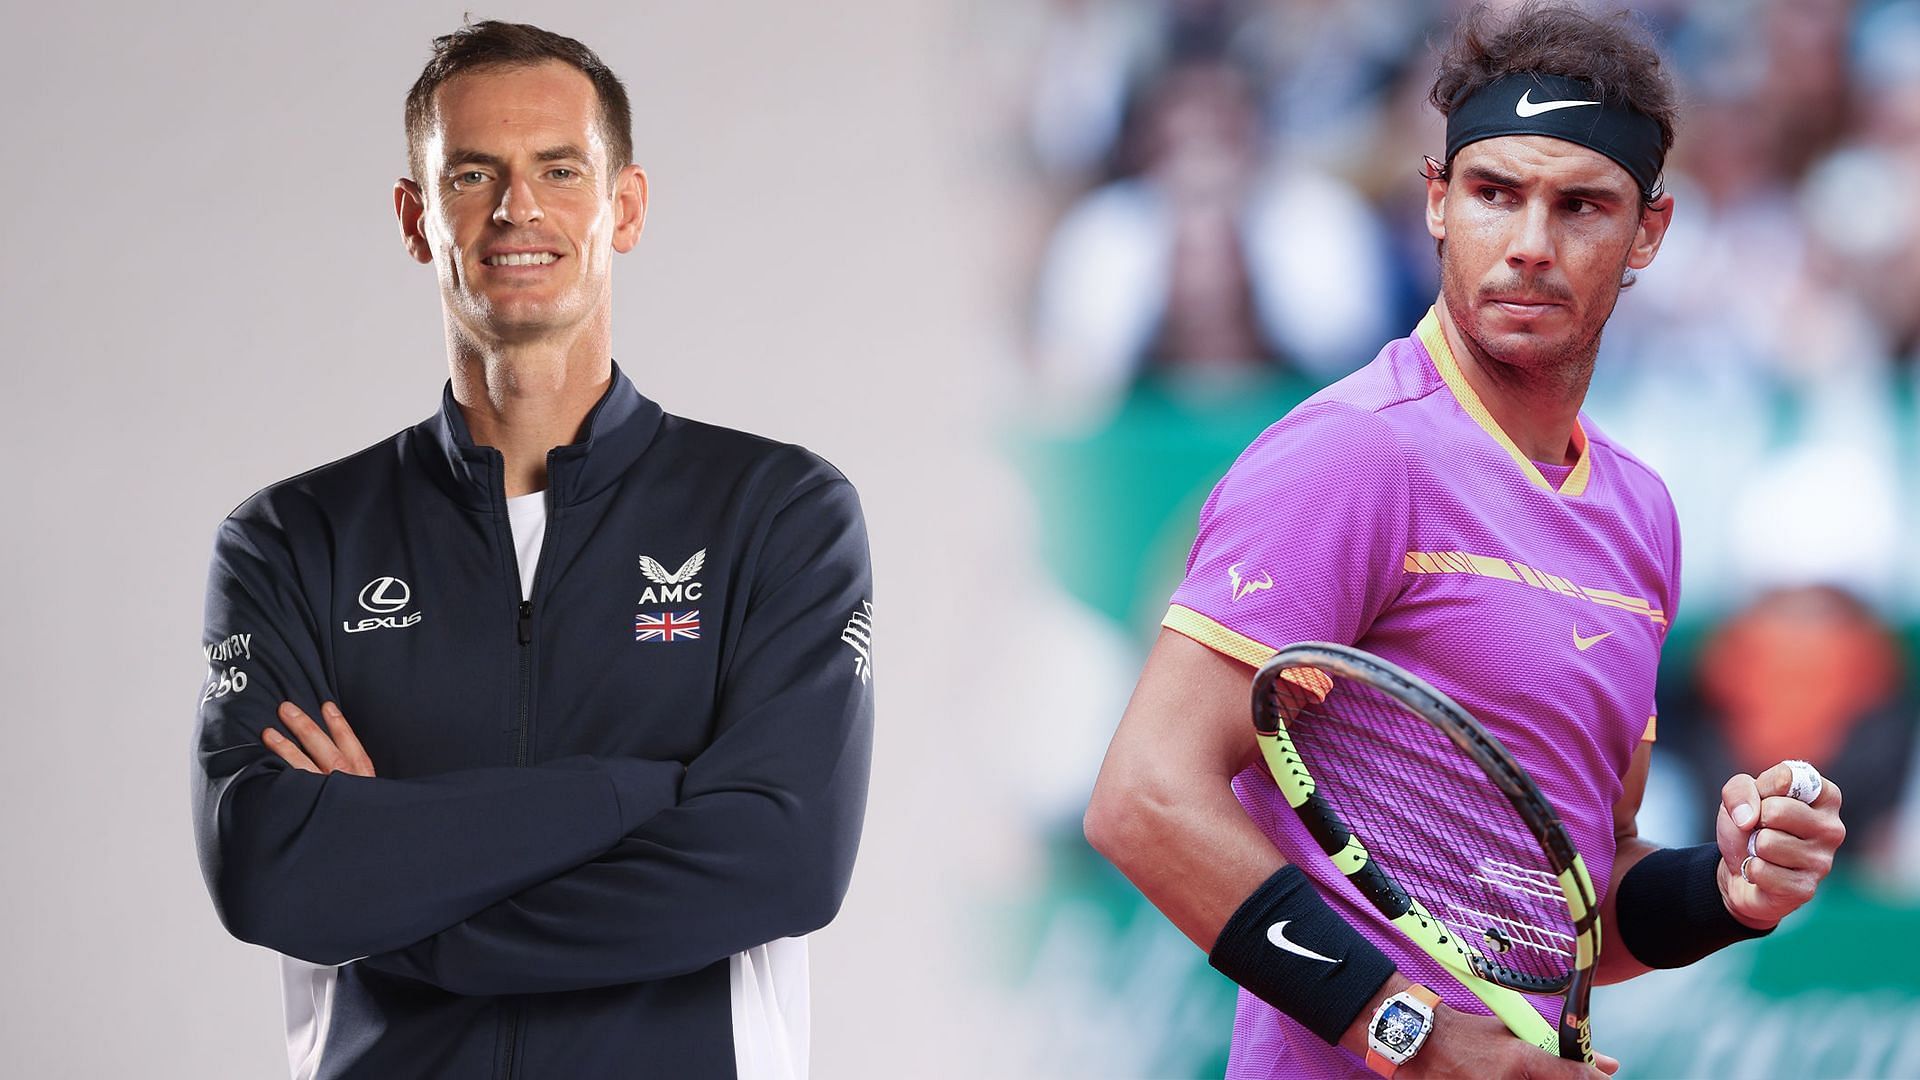 8 tennis players who have won the men's singles Olympic gold medal in the Open Era ft. Rafael Nadal, Andy Murray